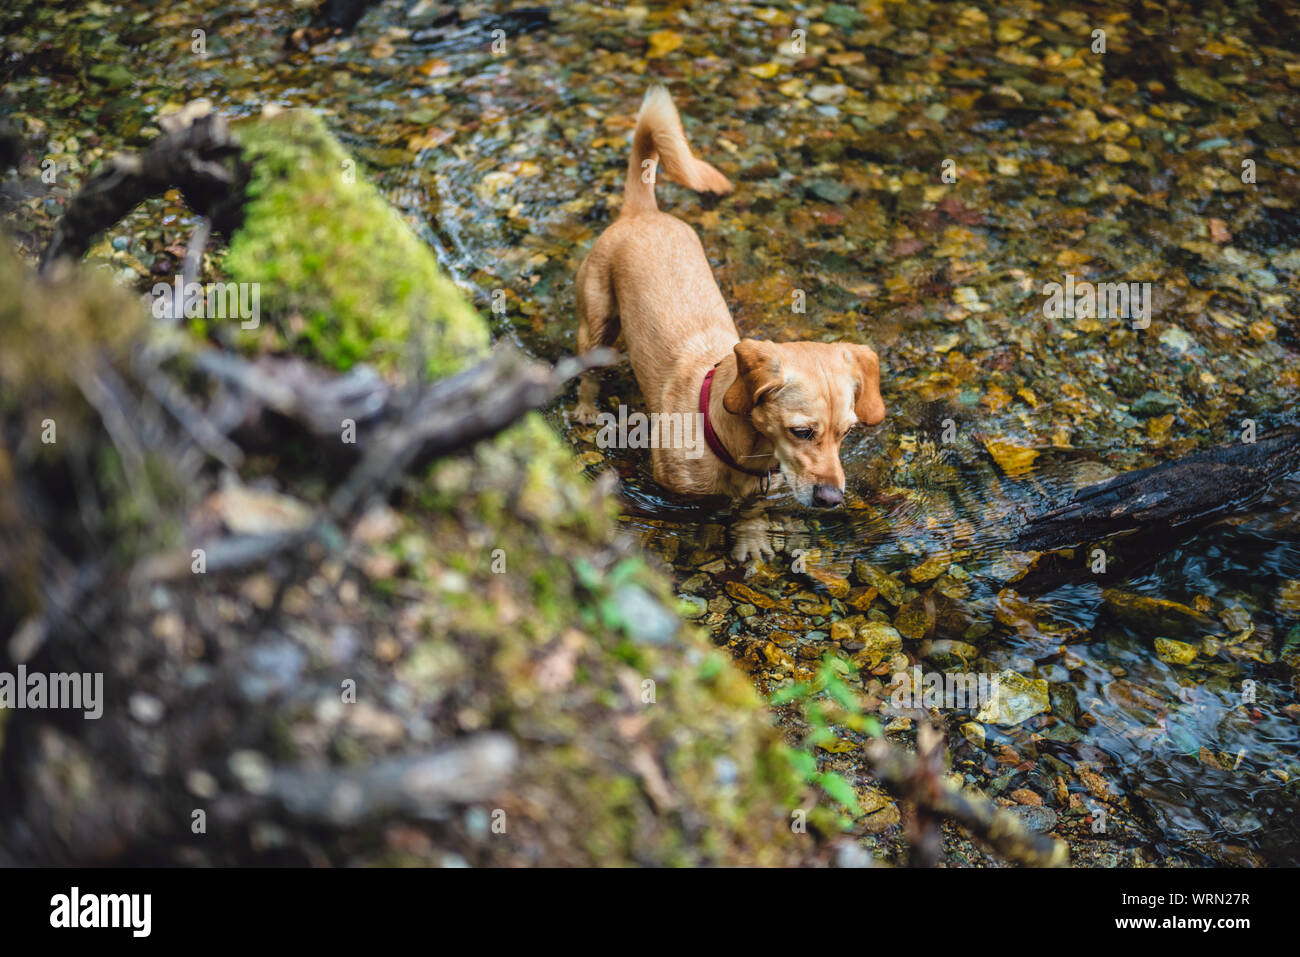 Small yellow dog standing in a small forest stream Stock Photo